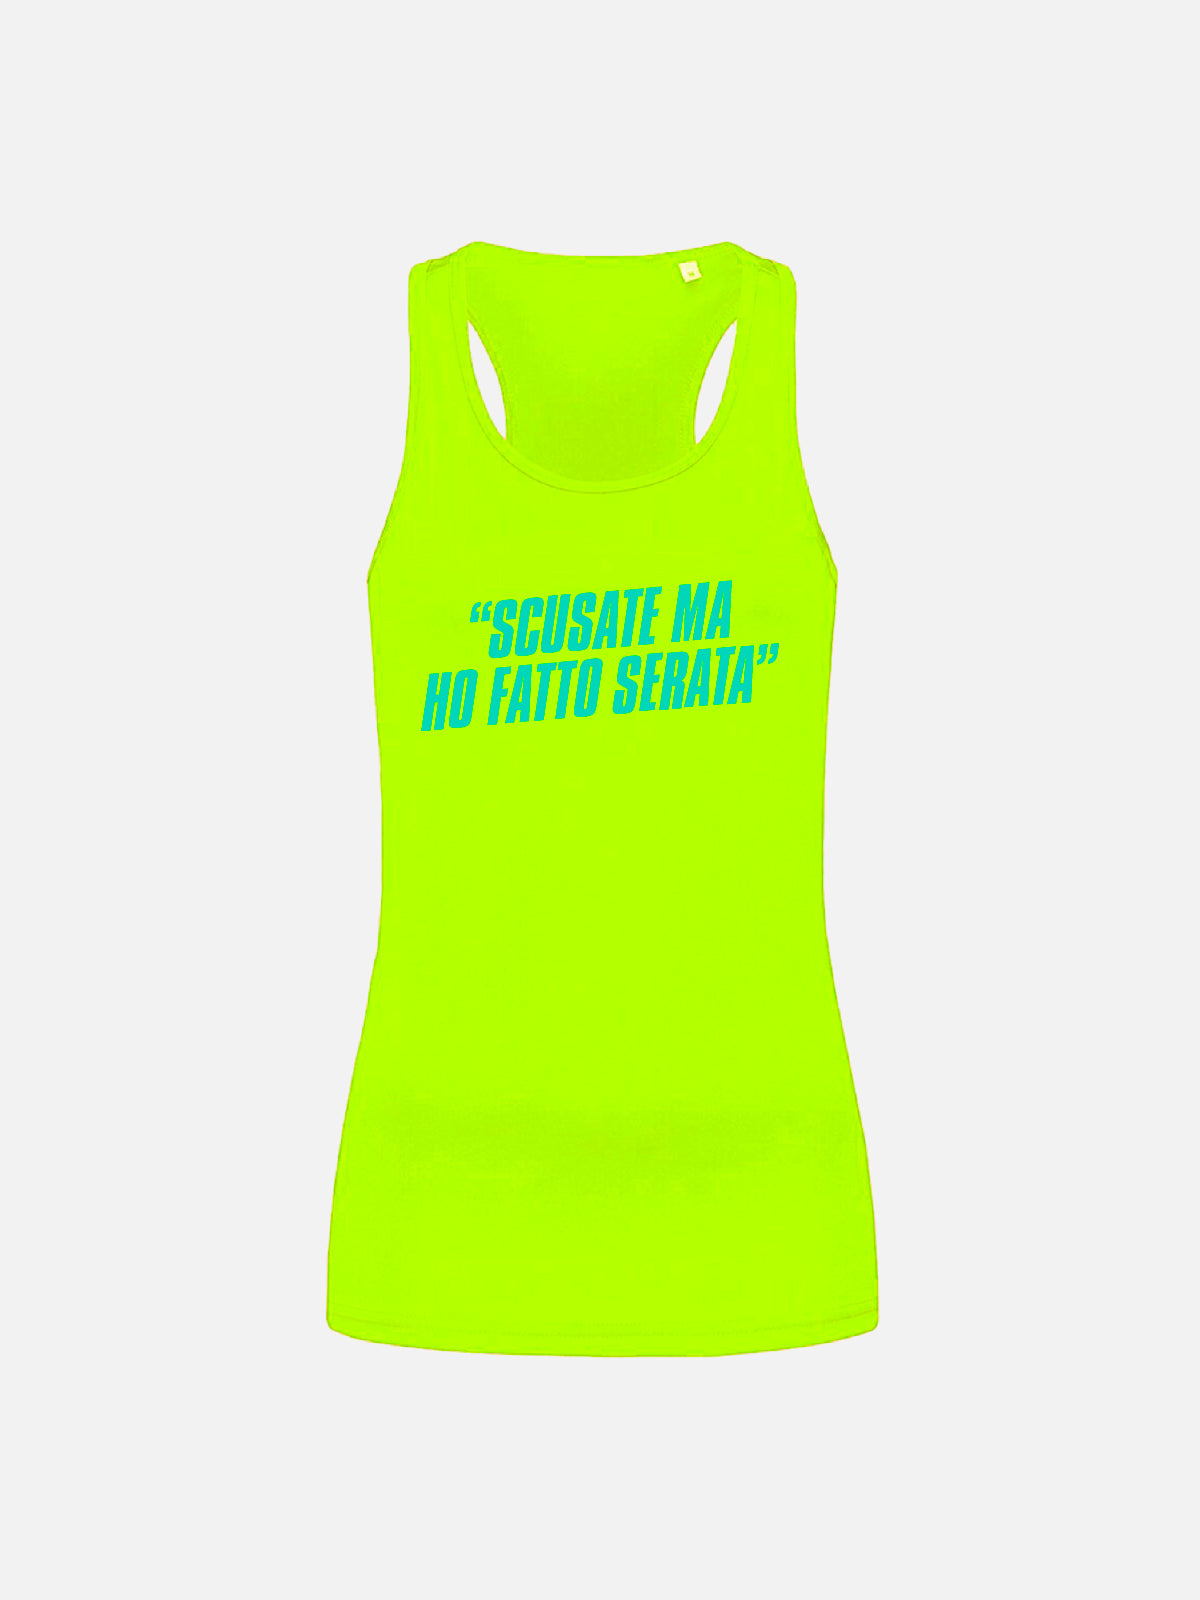 Personalized Tank Top - “Sorry But I Had a Night Out”